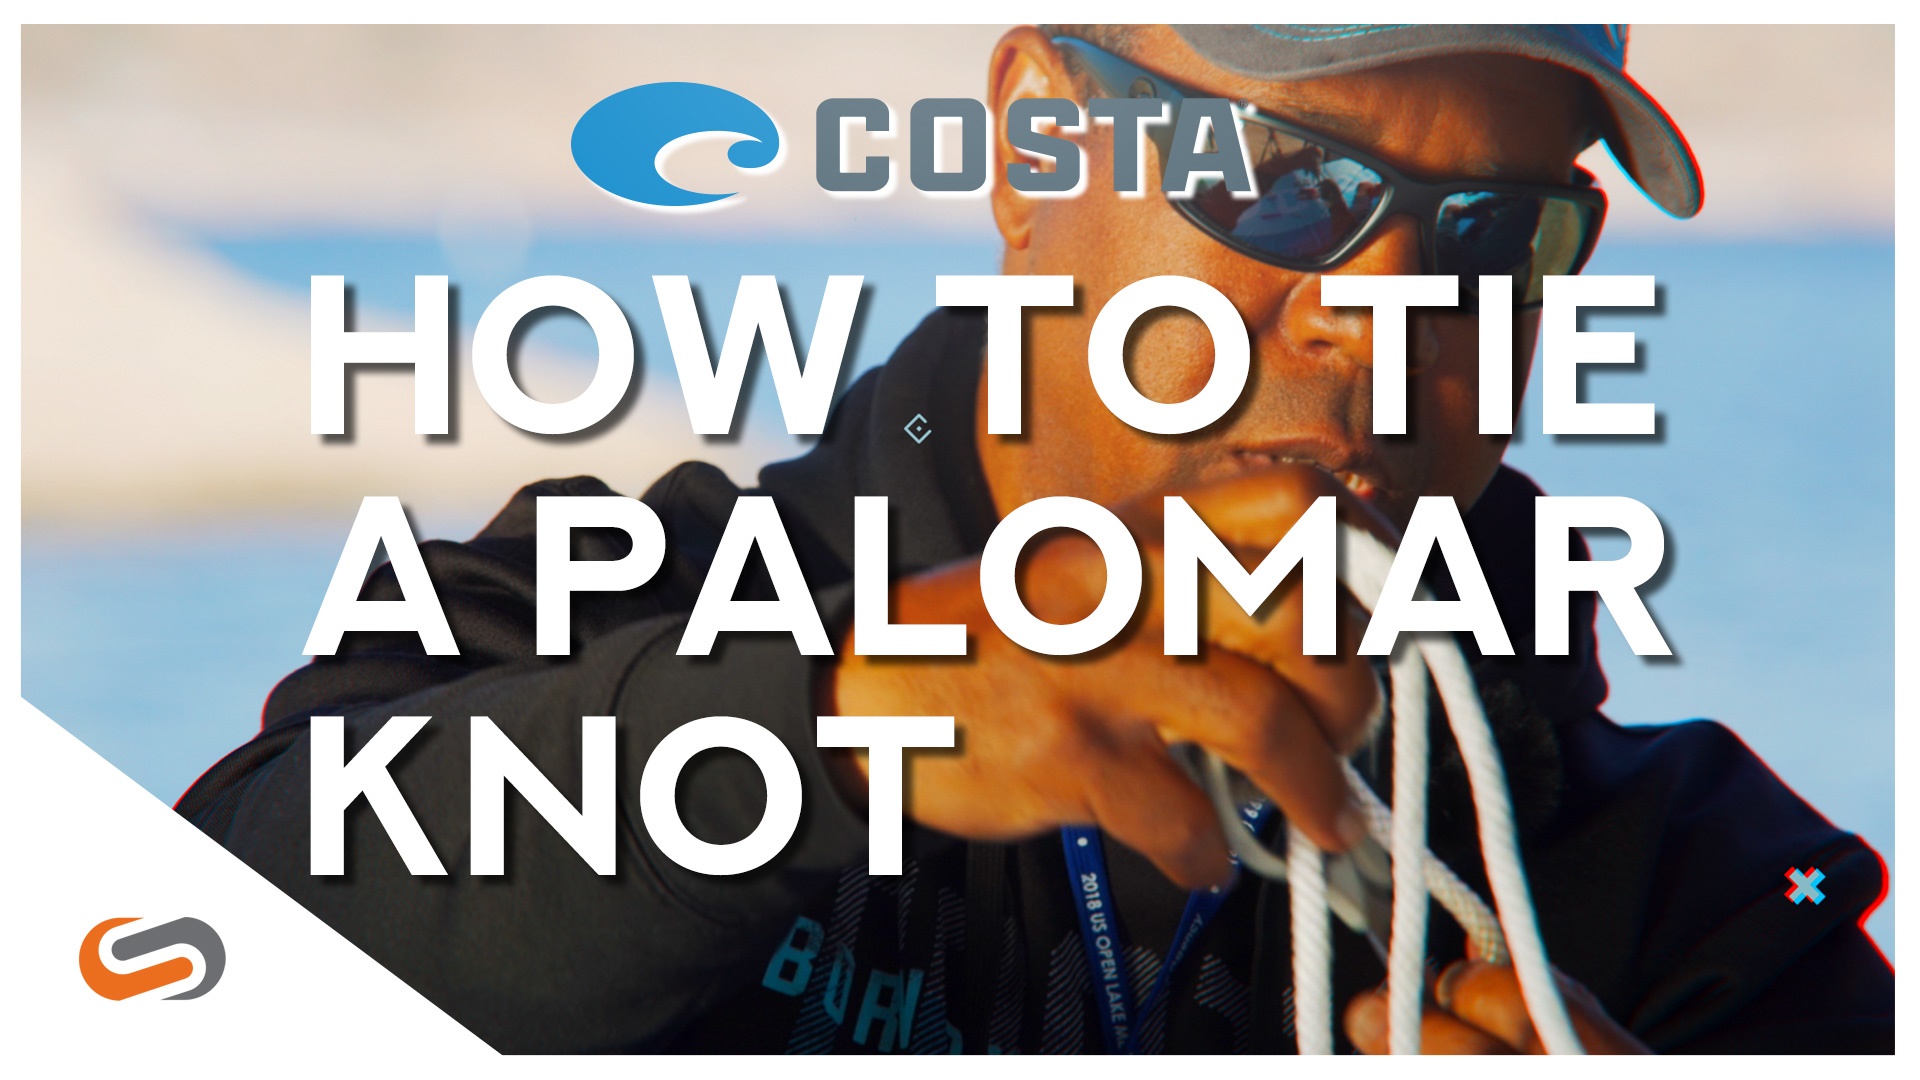 How to Tie a Palomar Knot